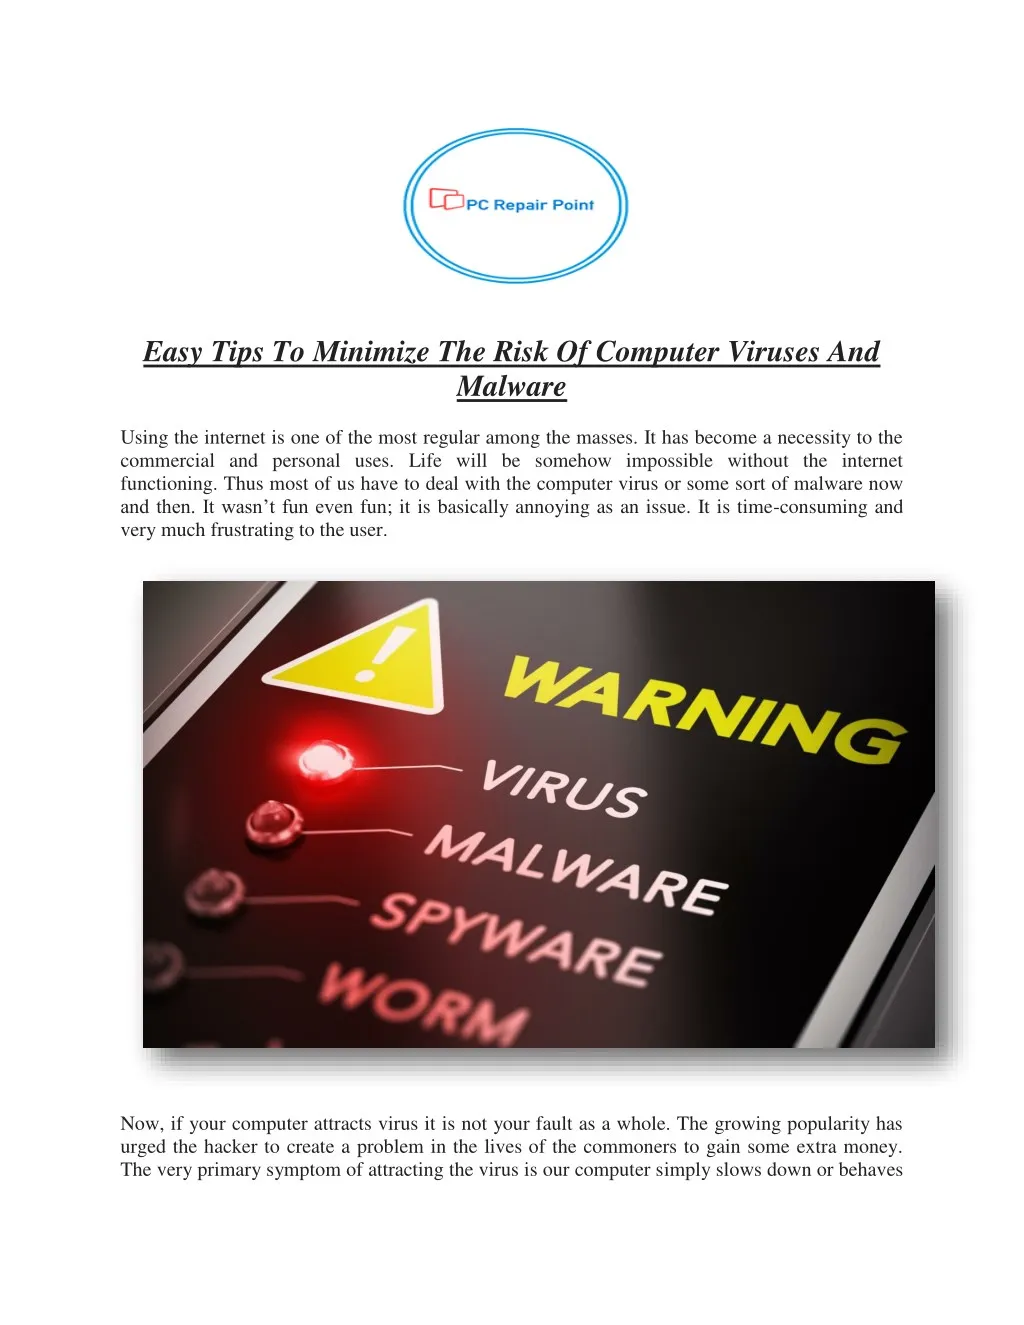 easy tips to minimize the risk of computer